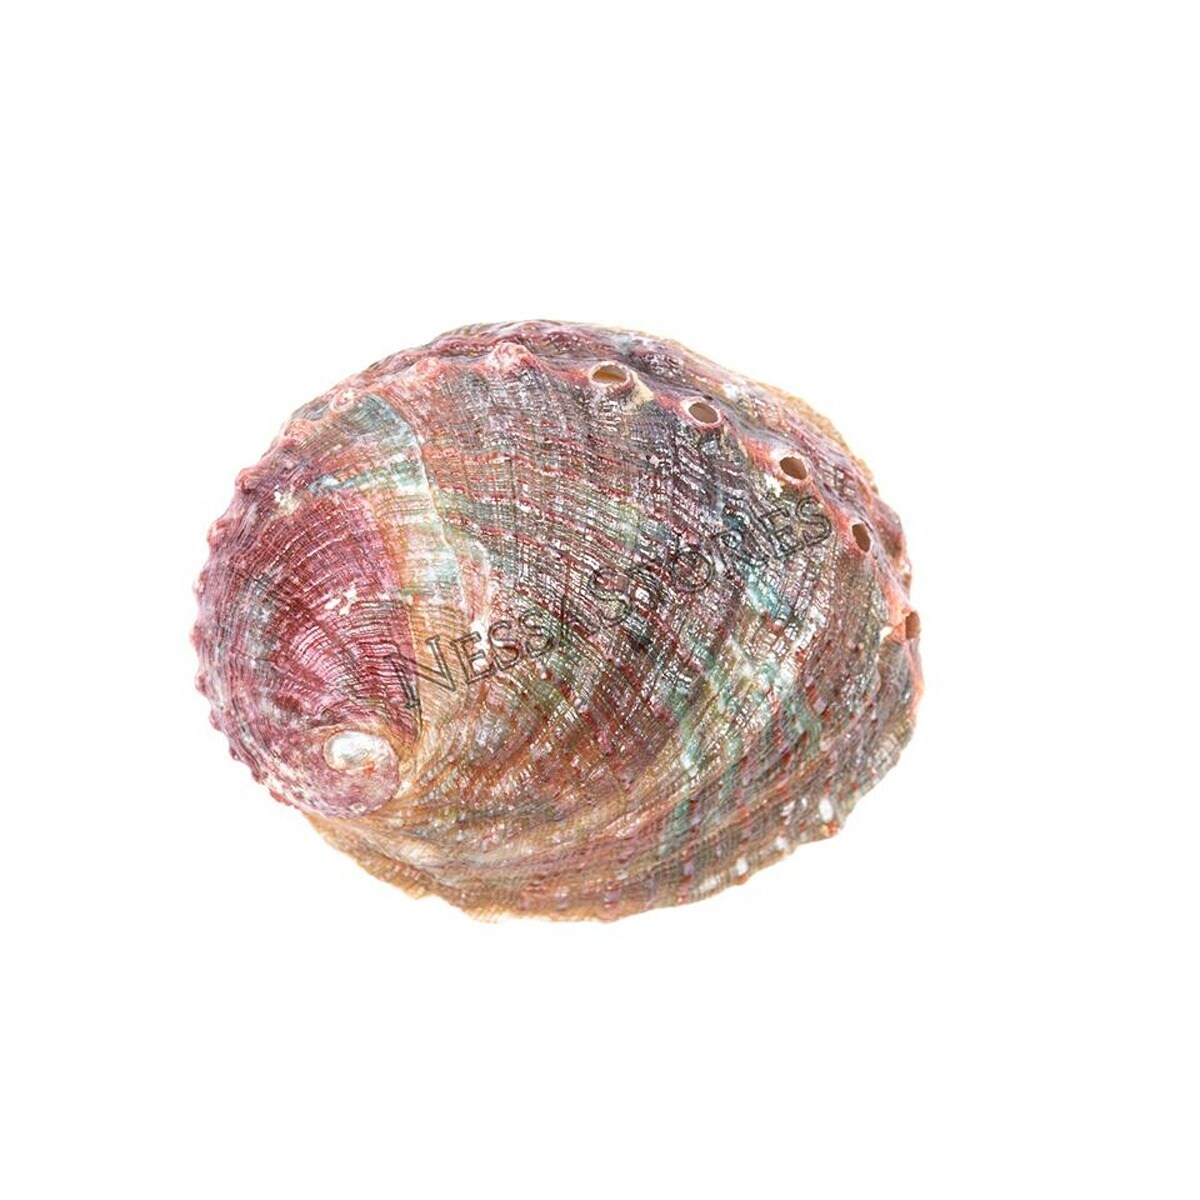 NESSA STORES 5 Inches Threaded Abalone Sea Shell